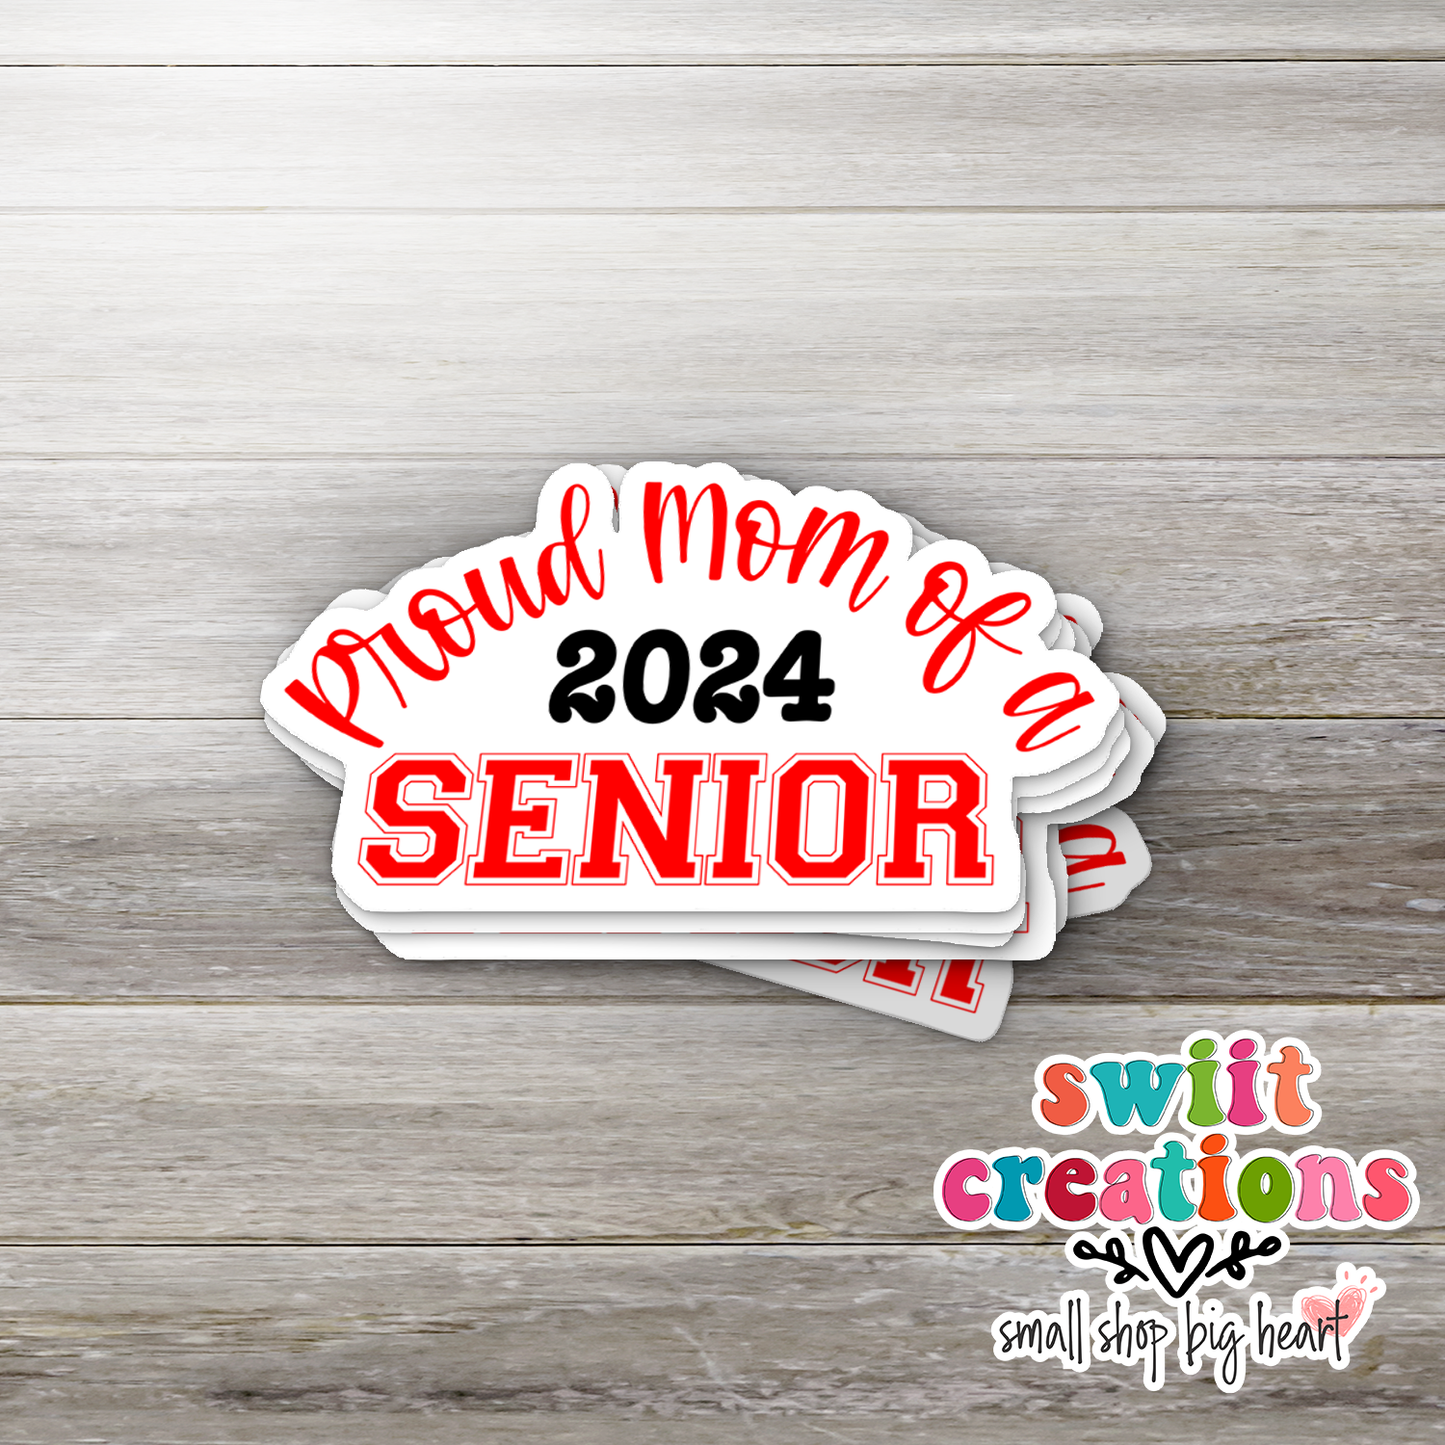 Proud Mom of a 2024 Senior Waterproof Sticker - Different Color Options Available (SS719)